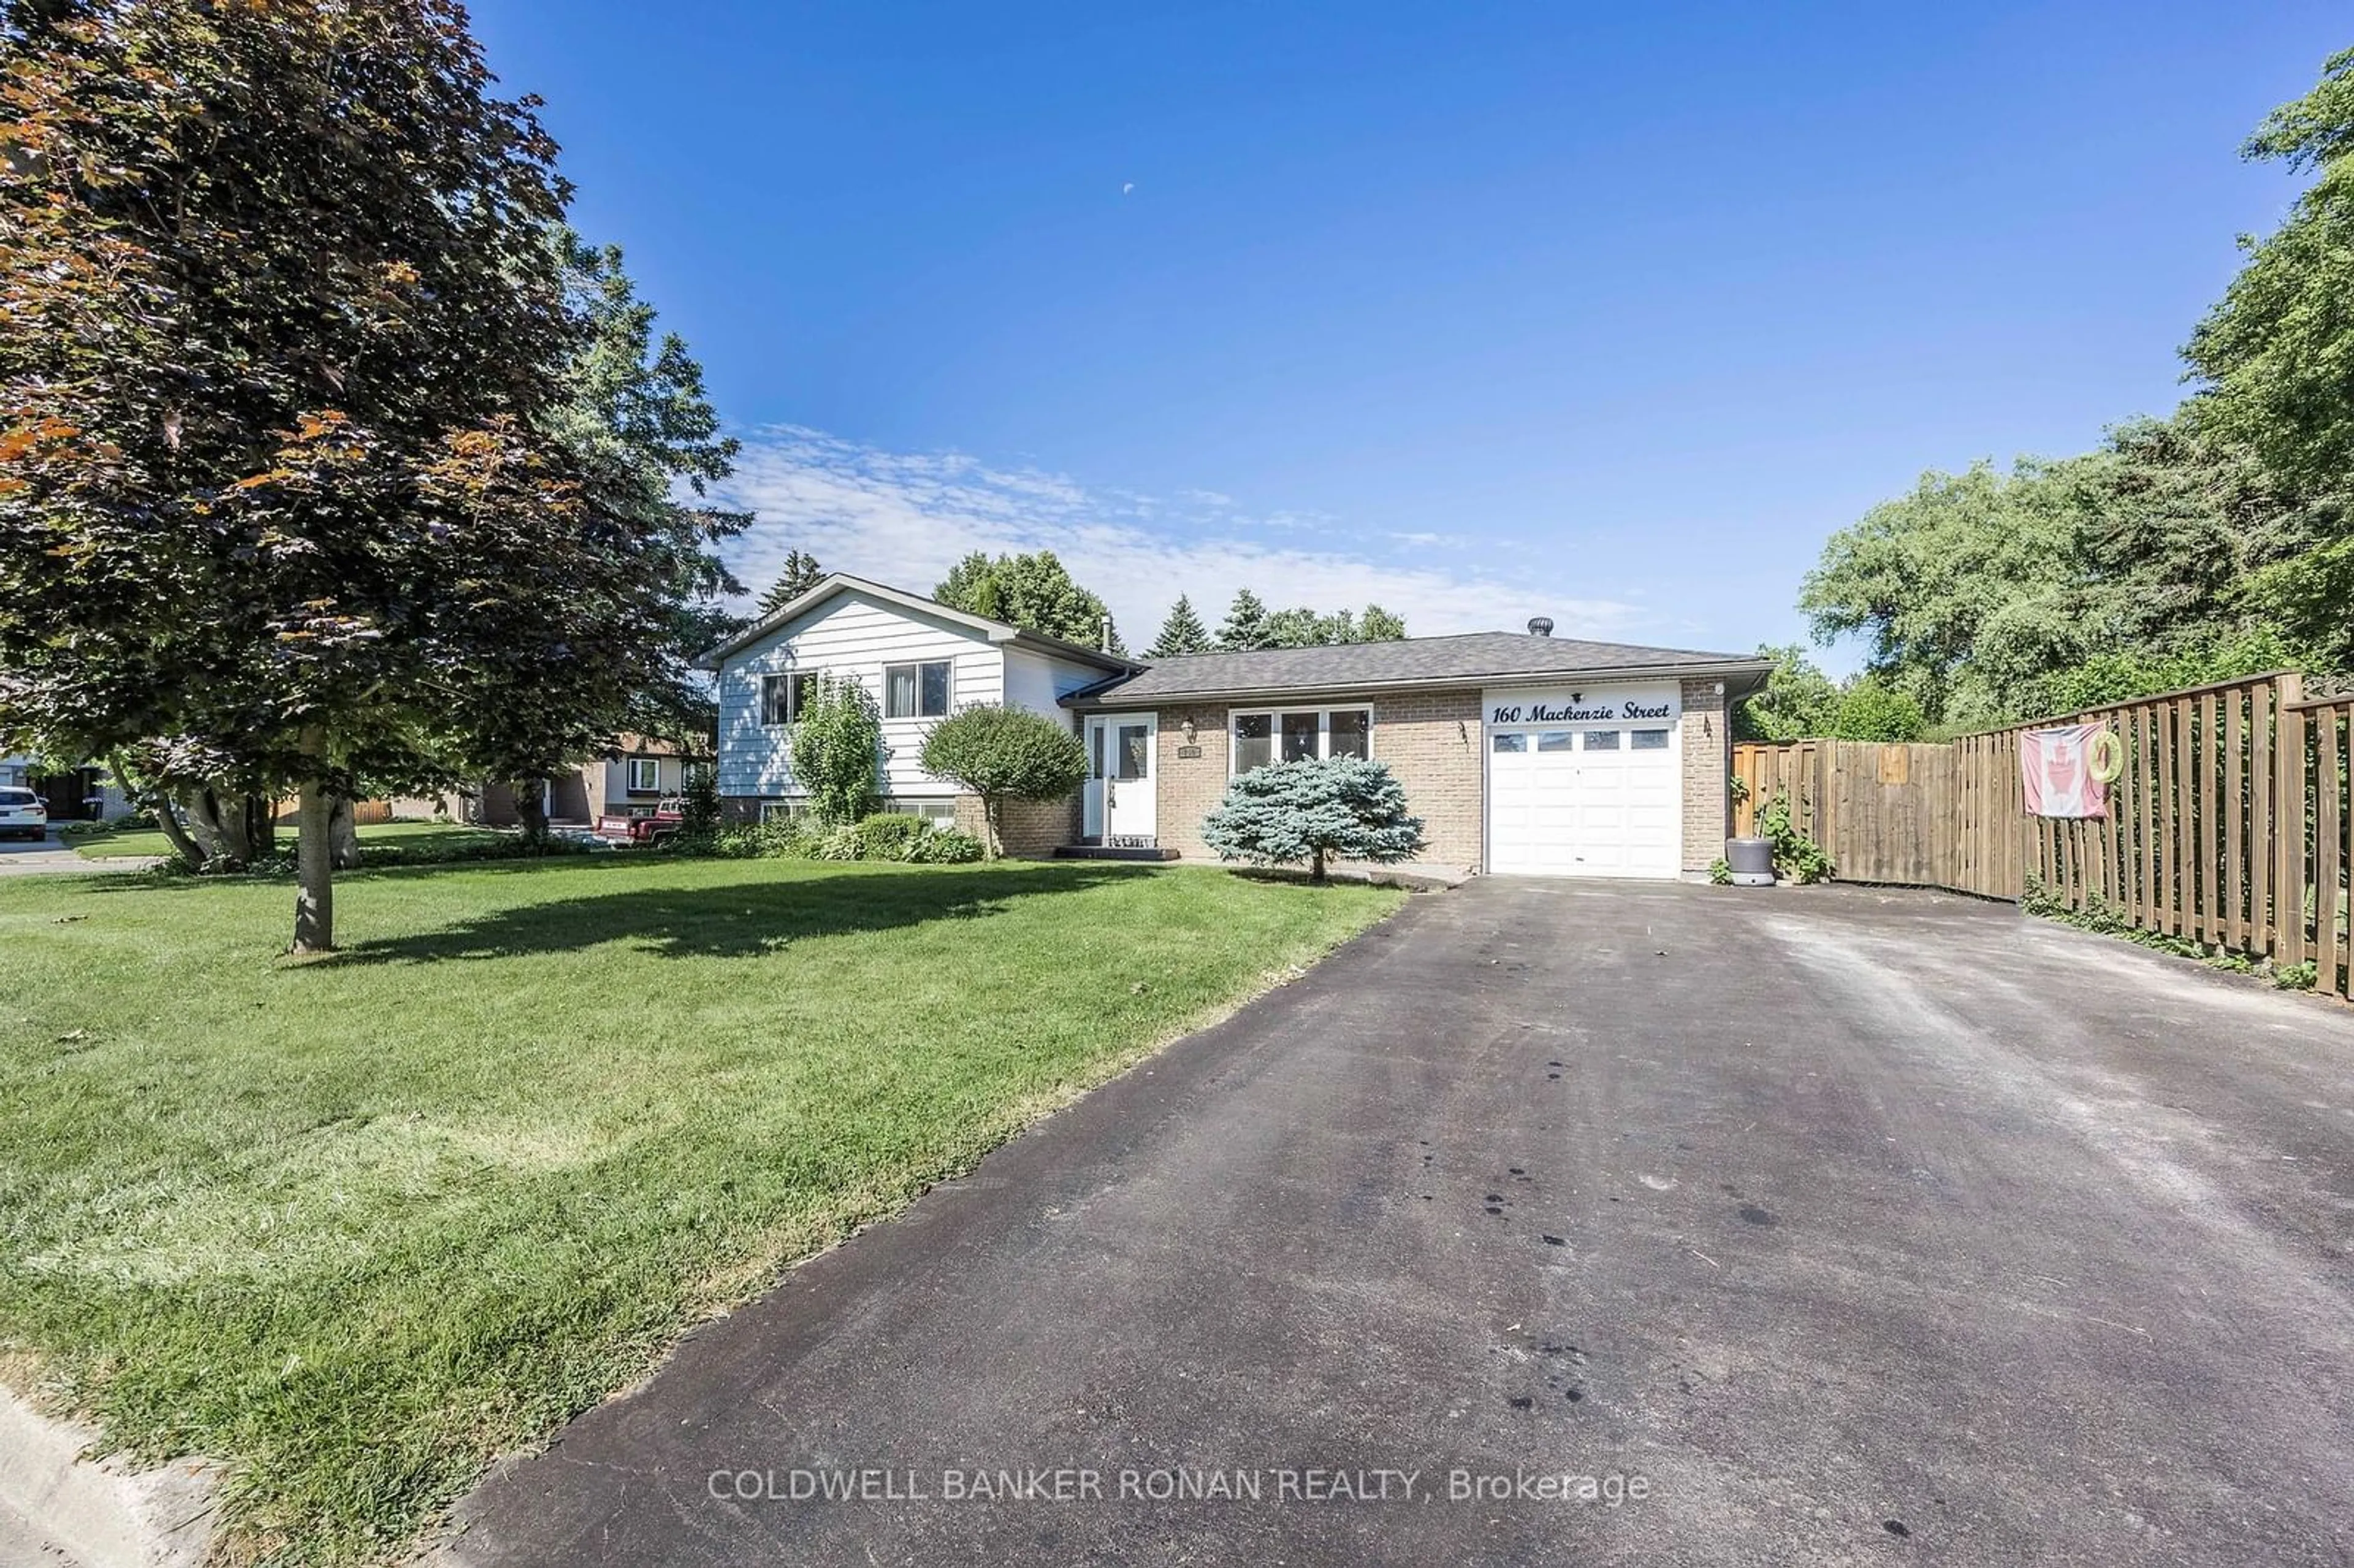 Frontside or backside of a home for 160 MacKenzie St, New Tecumseth Ontario L9R 1B8